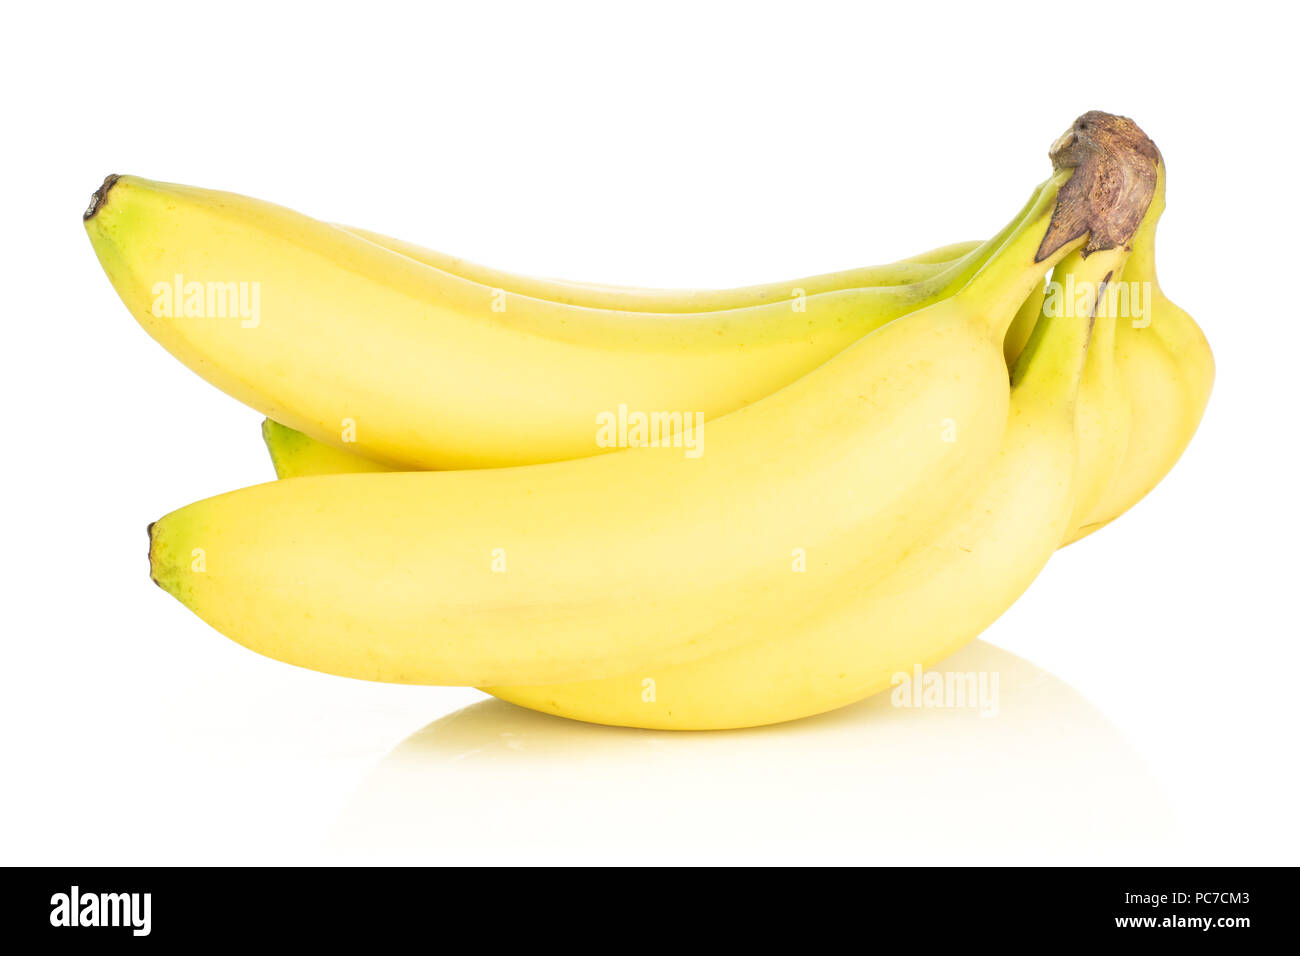 Group of five whole fresh yellow banana one cluster side view isolated on white background Stock Photo